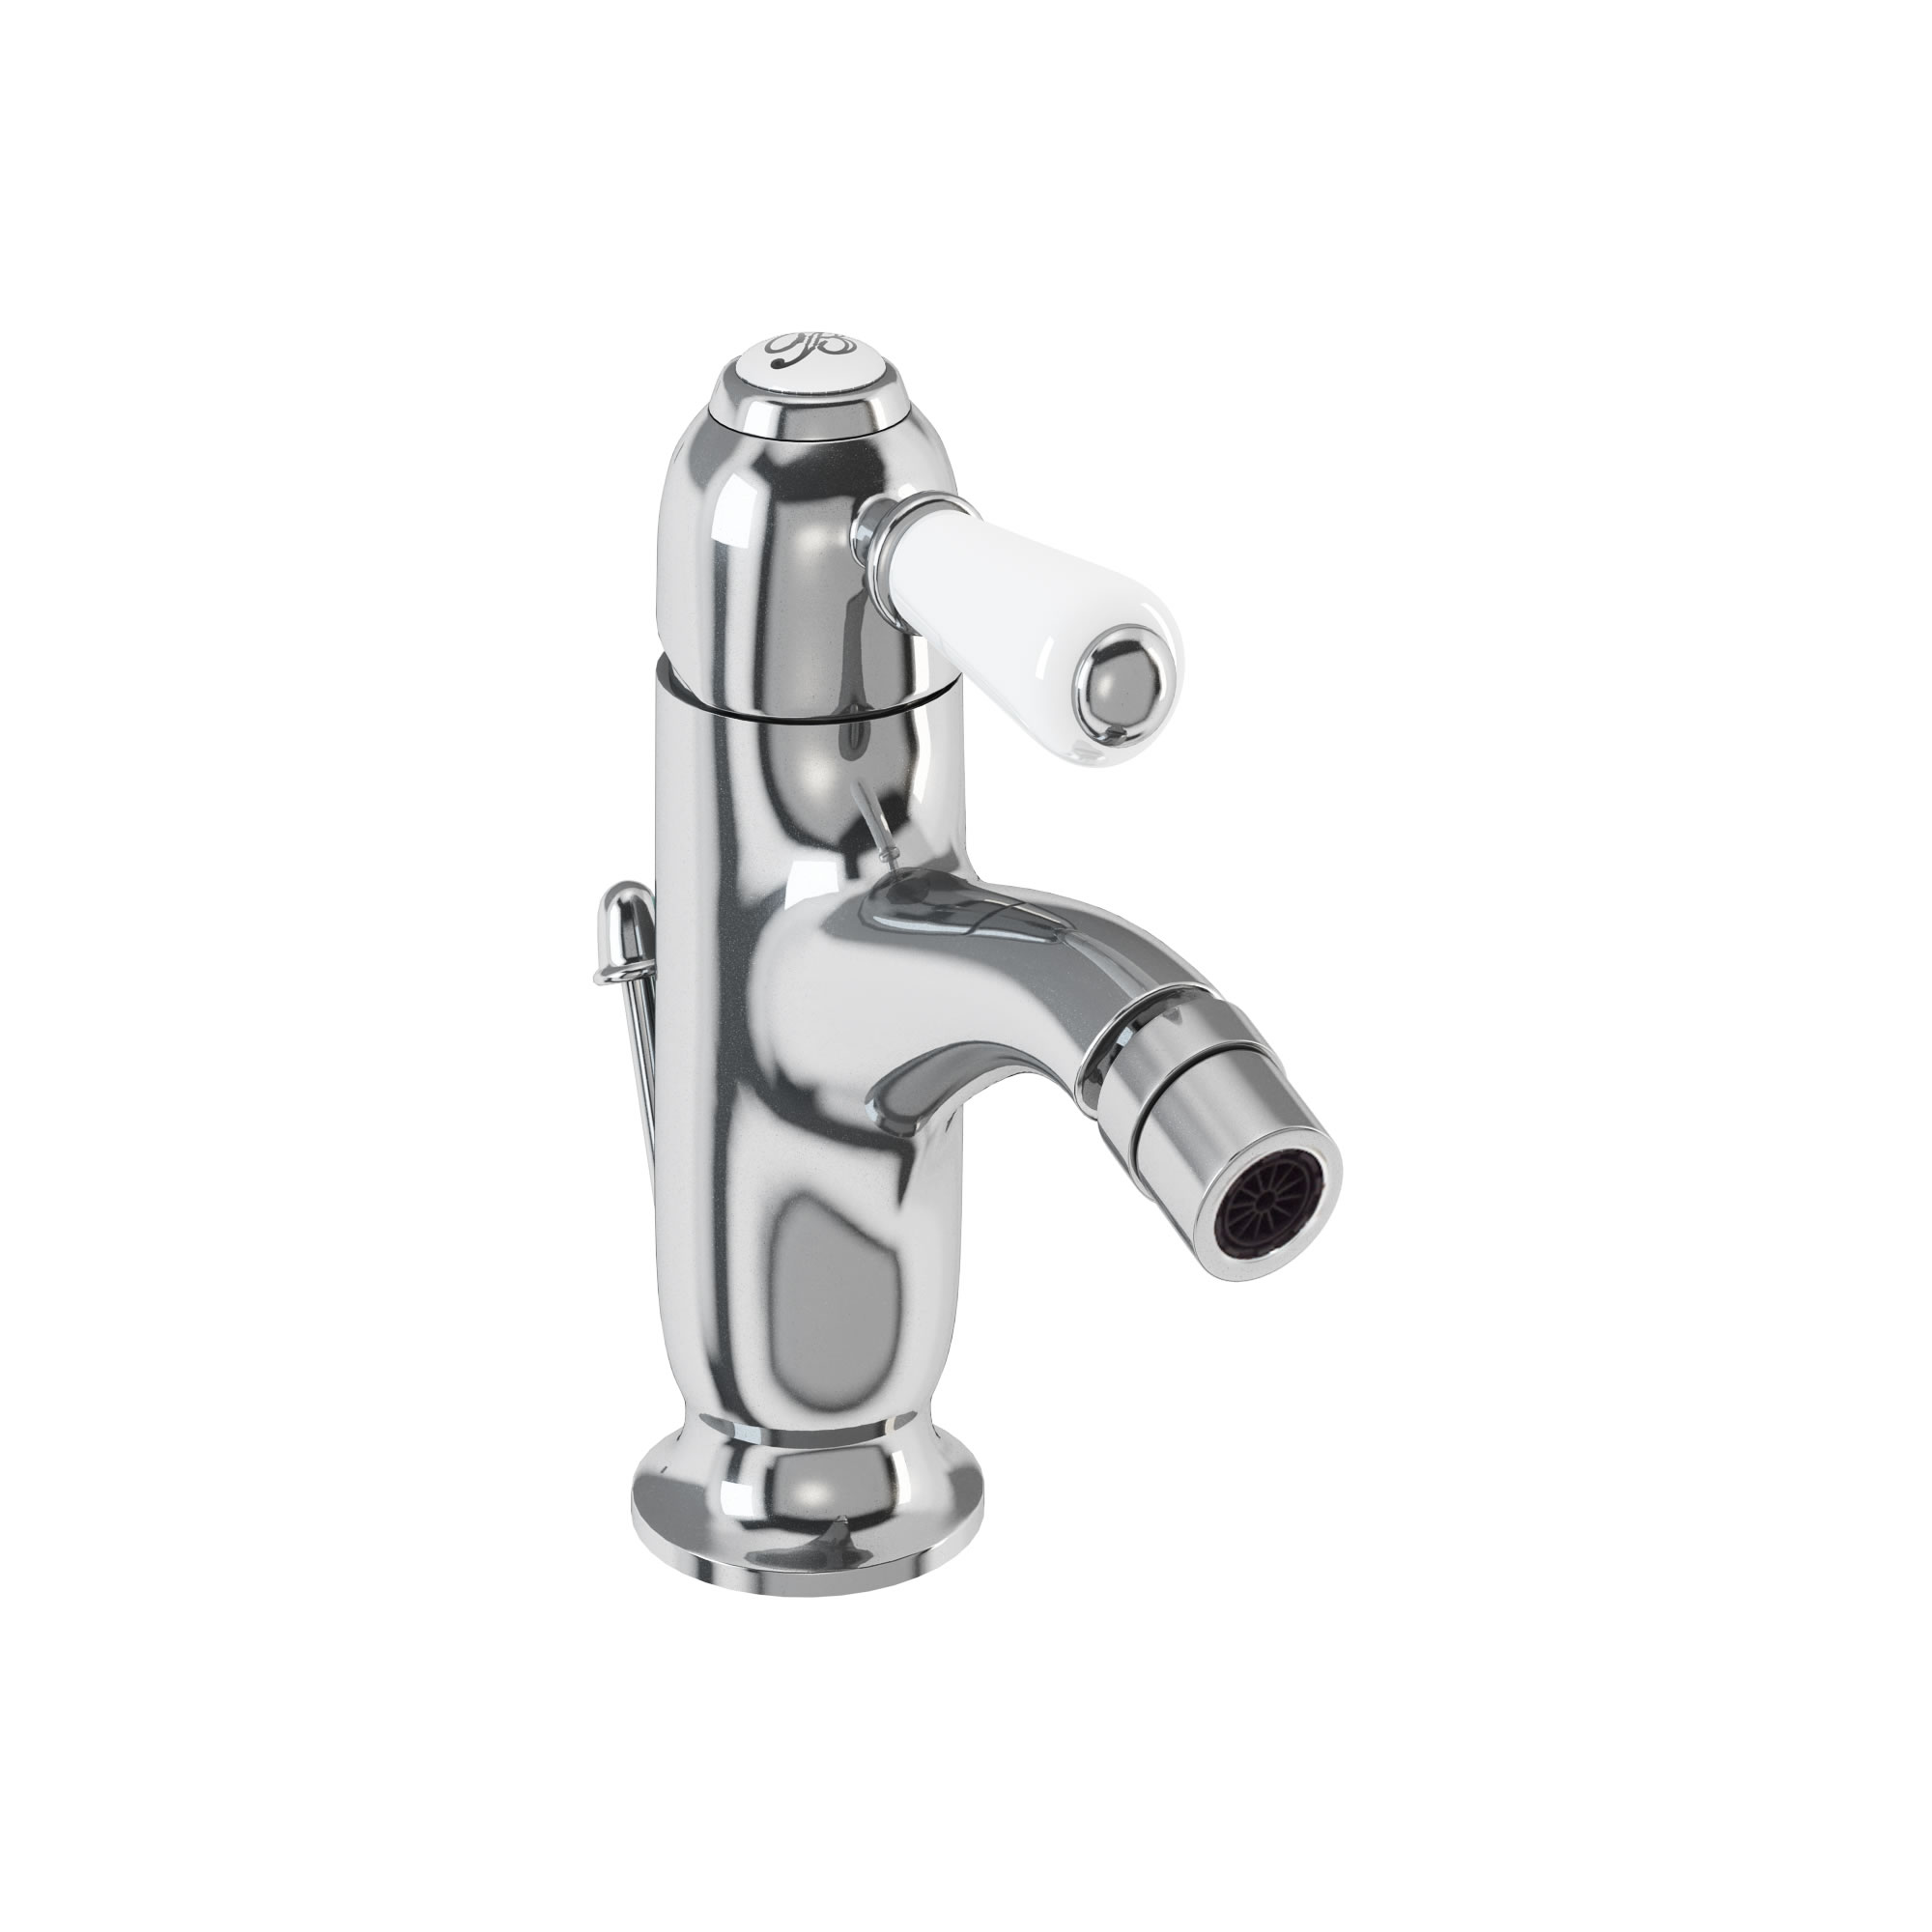 Chelsea curved bidet mixer with pop up waste